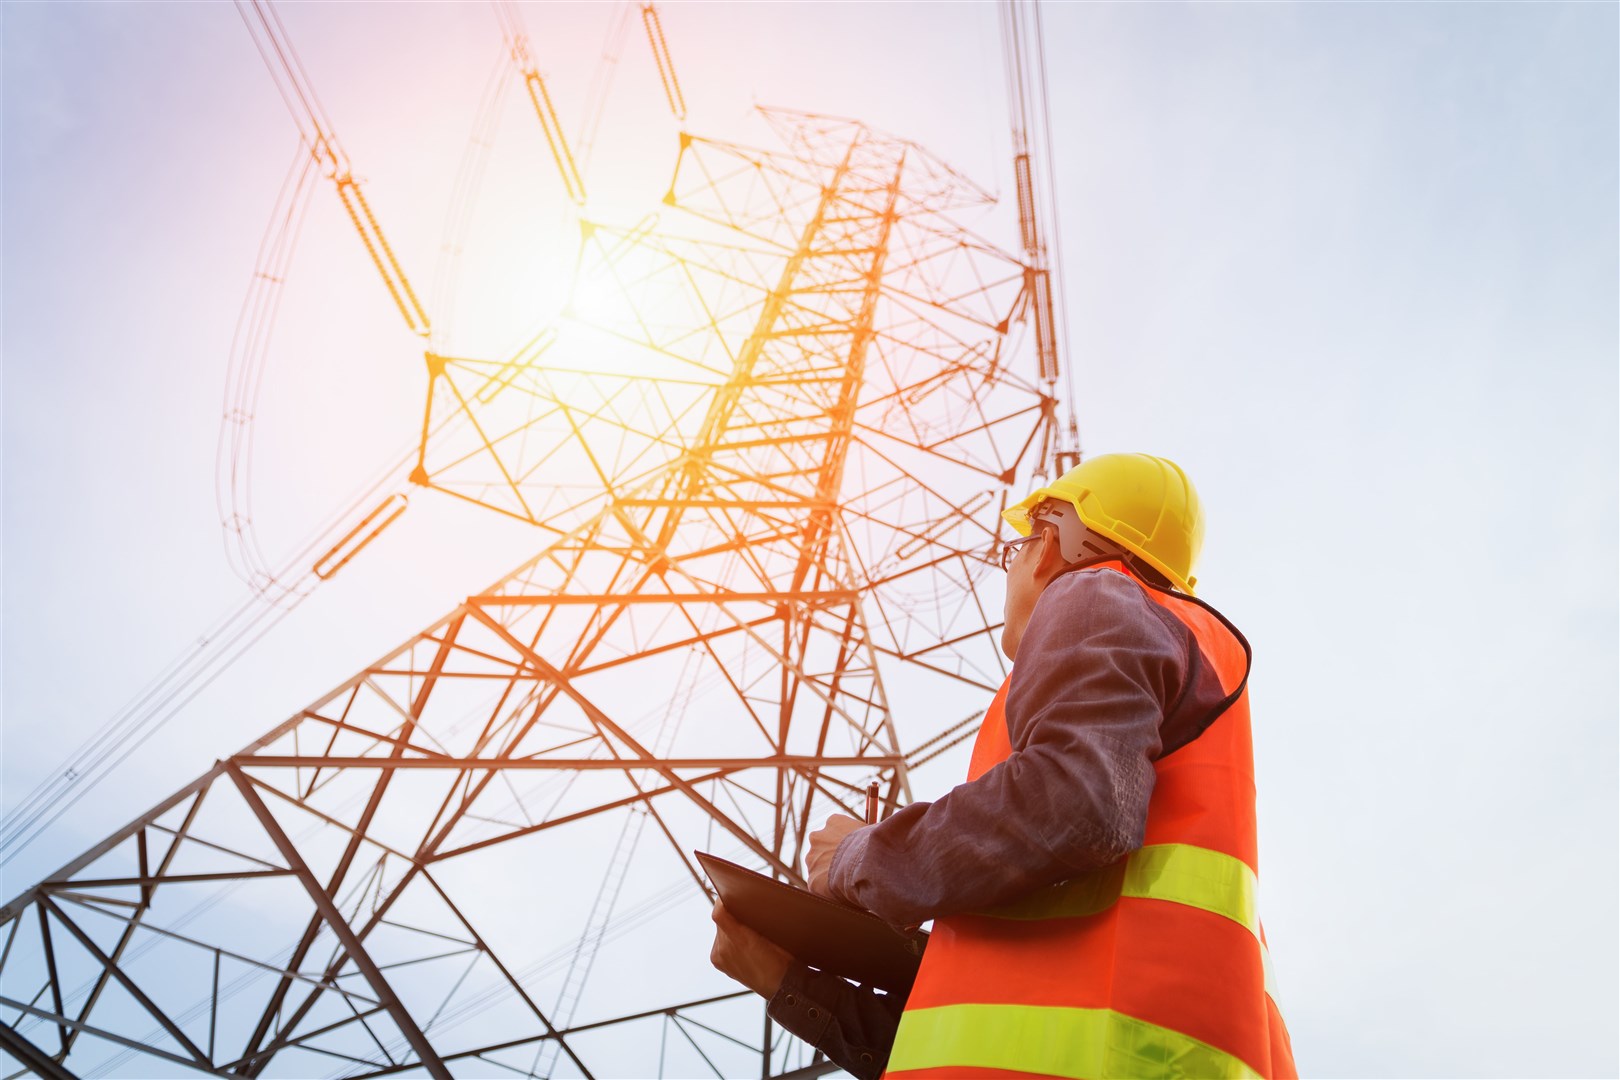 An engineer working on a high-voltage tower.